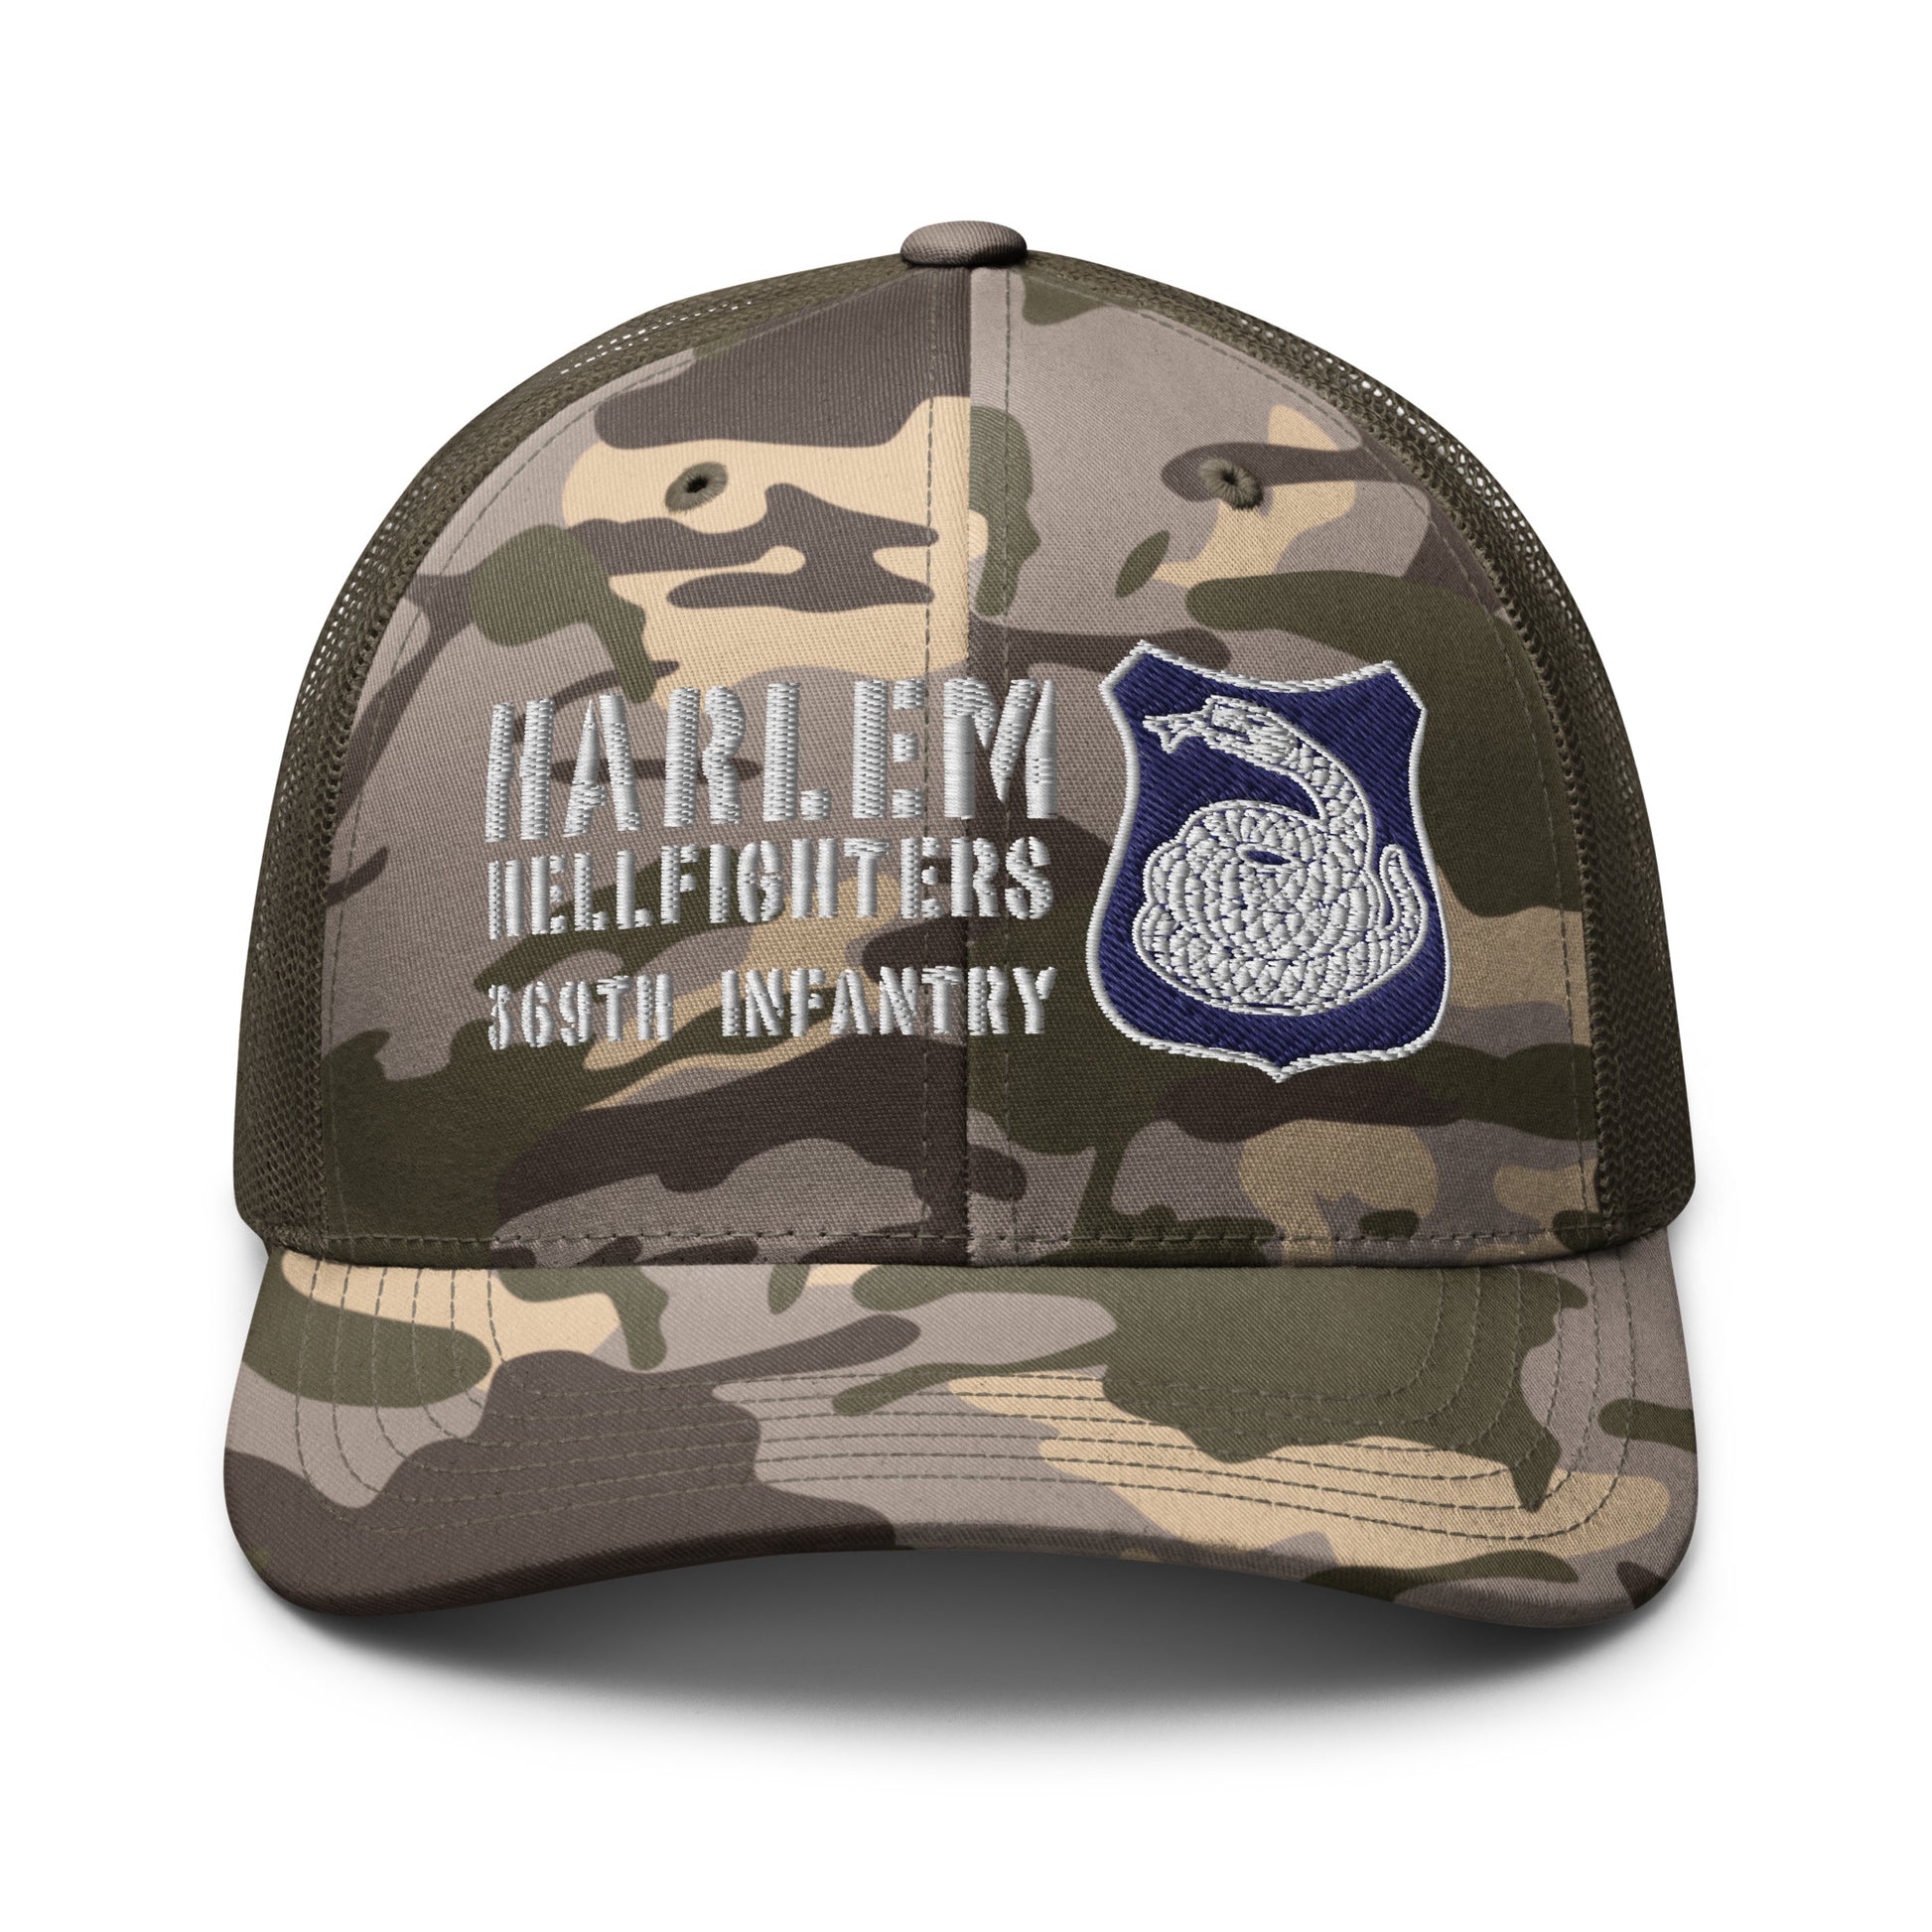 tan color camo trucker hat with rattlesnake crest and text reading harlem hellfighters